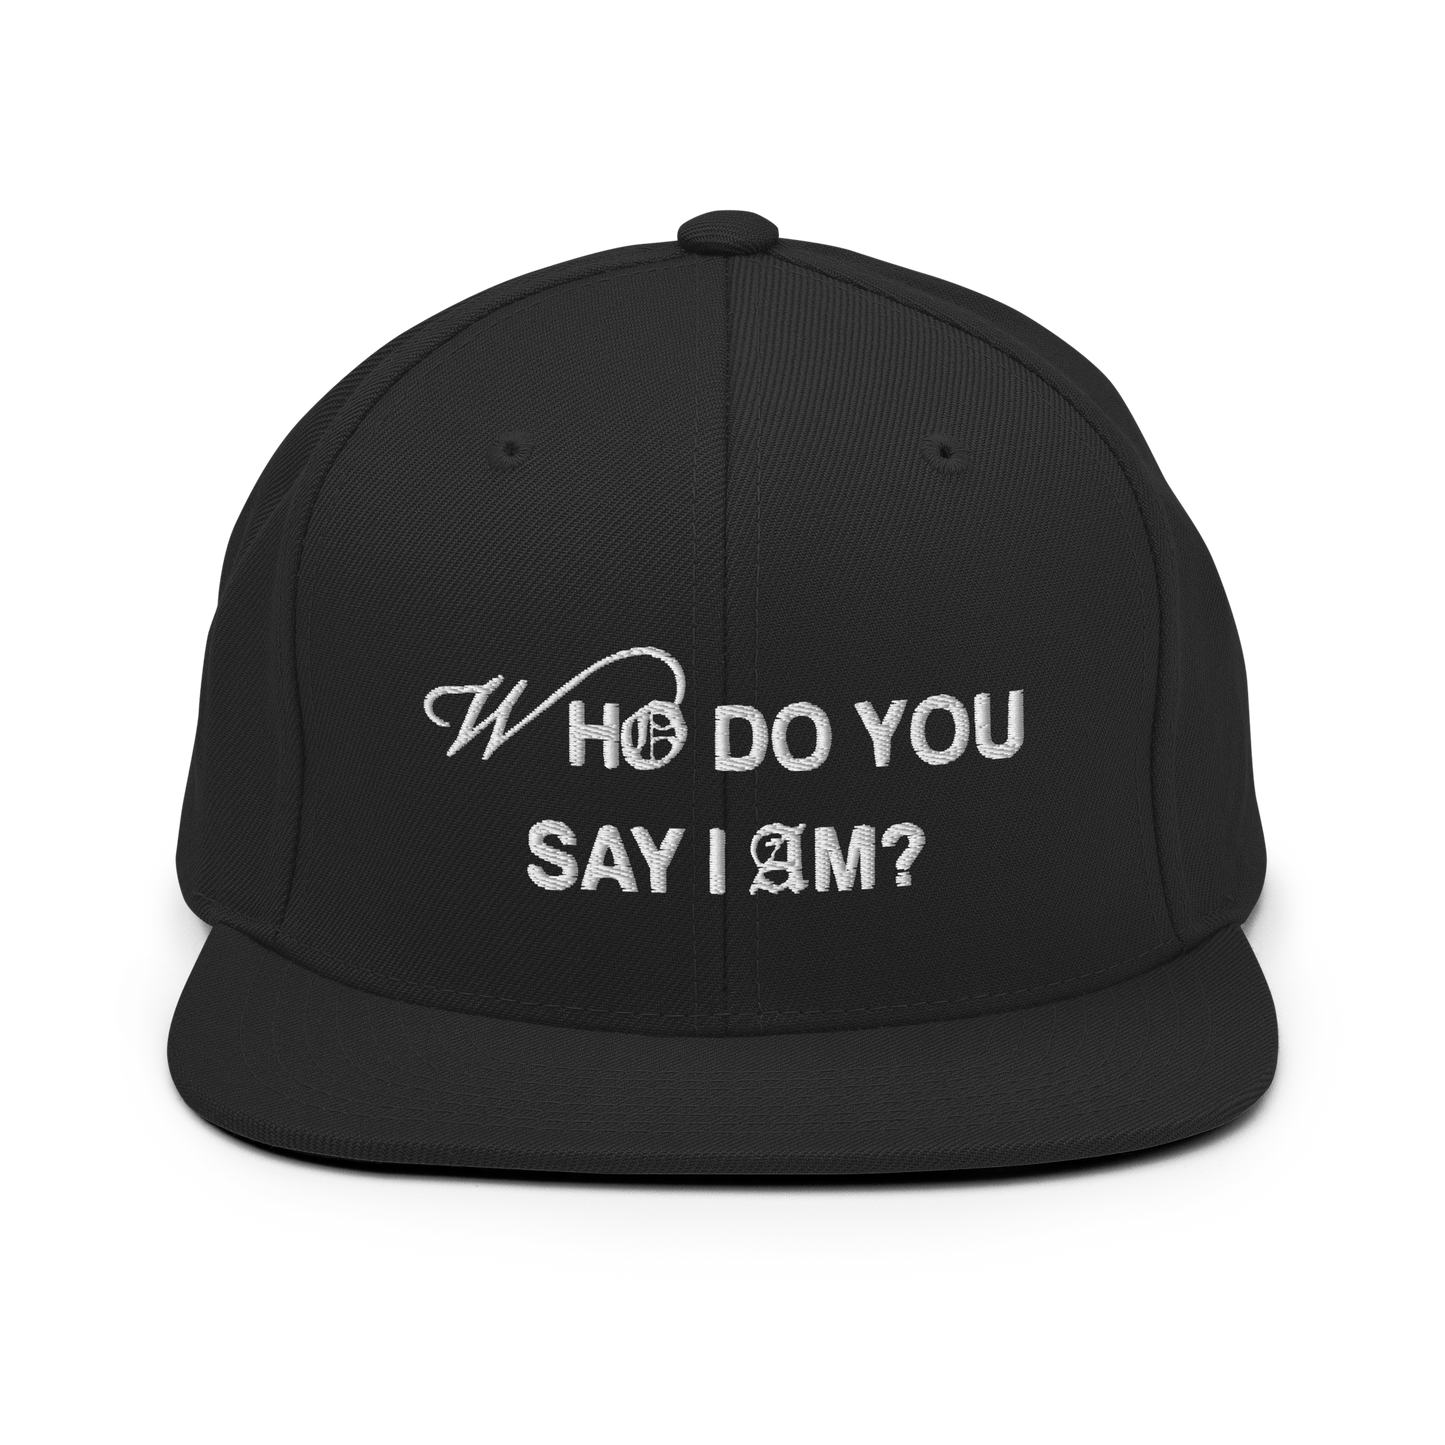 The Table - "Who Do You Say I Am?" - Snapback Hat